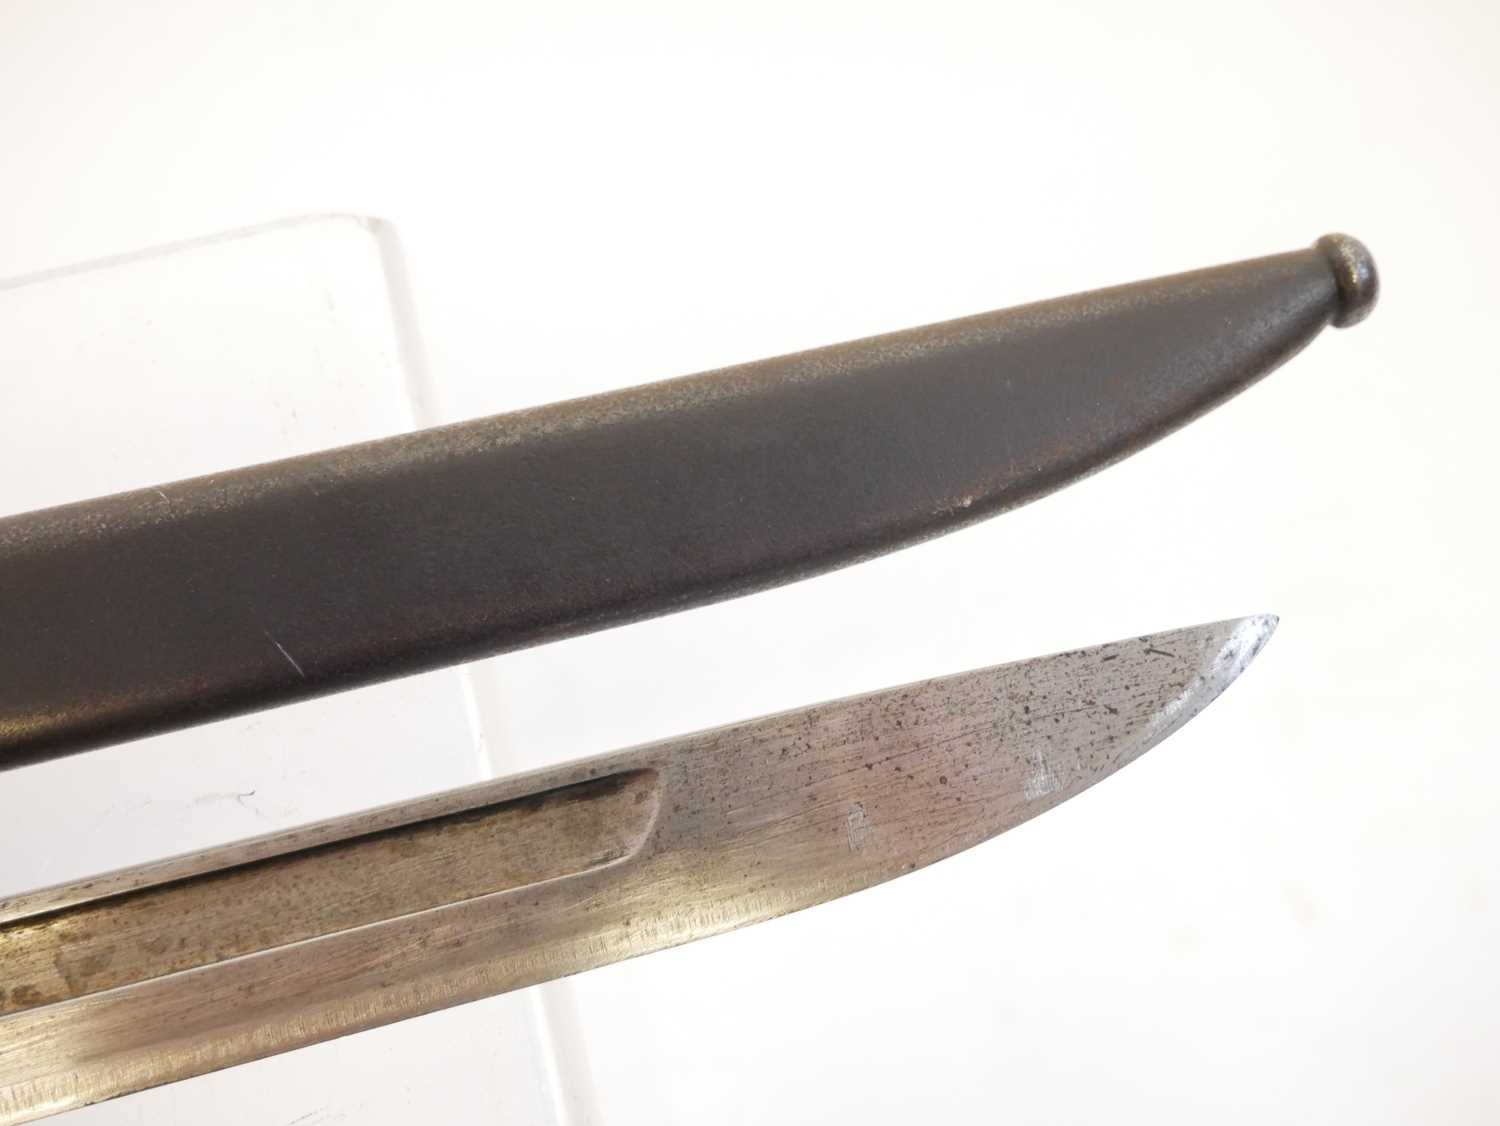 Japanese Arisaka type 30 bayonet and scabbard. Buyer must be over the age of 18. Age verification ID - Image 5 of 9